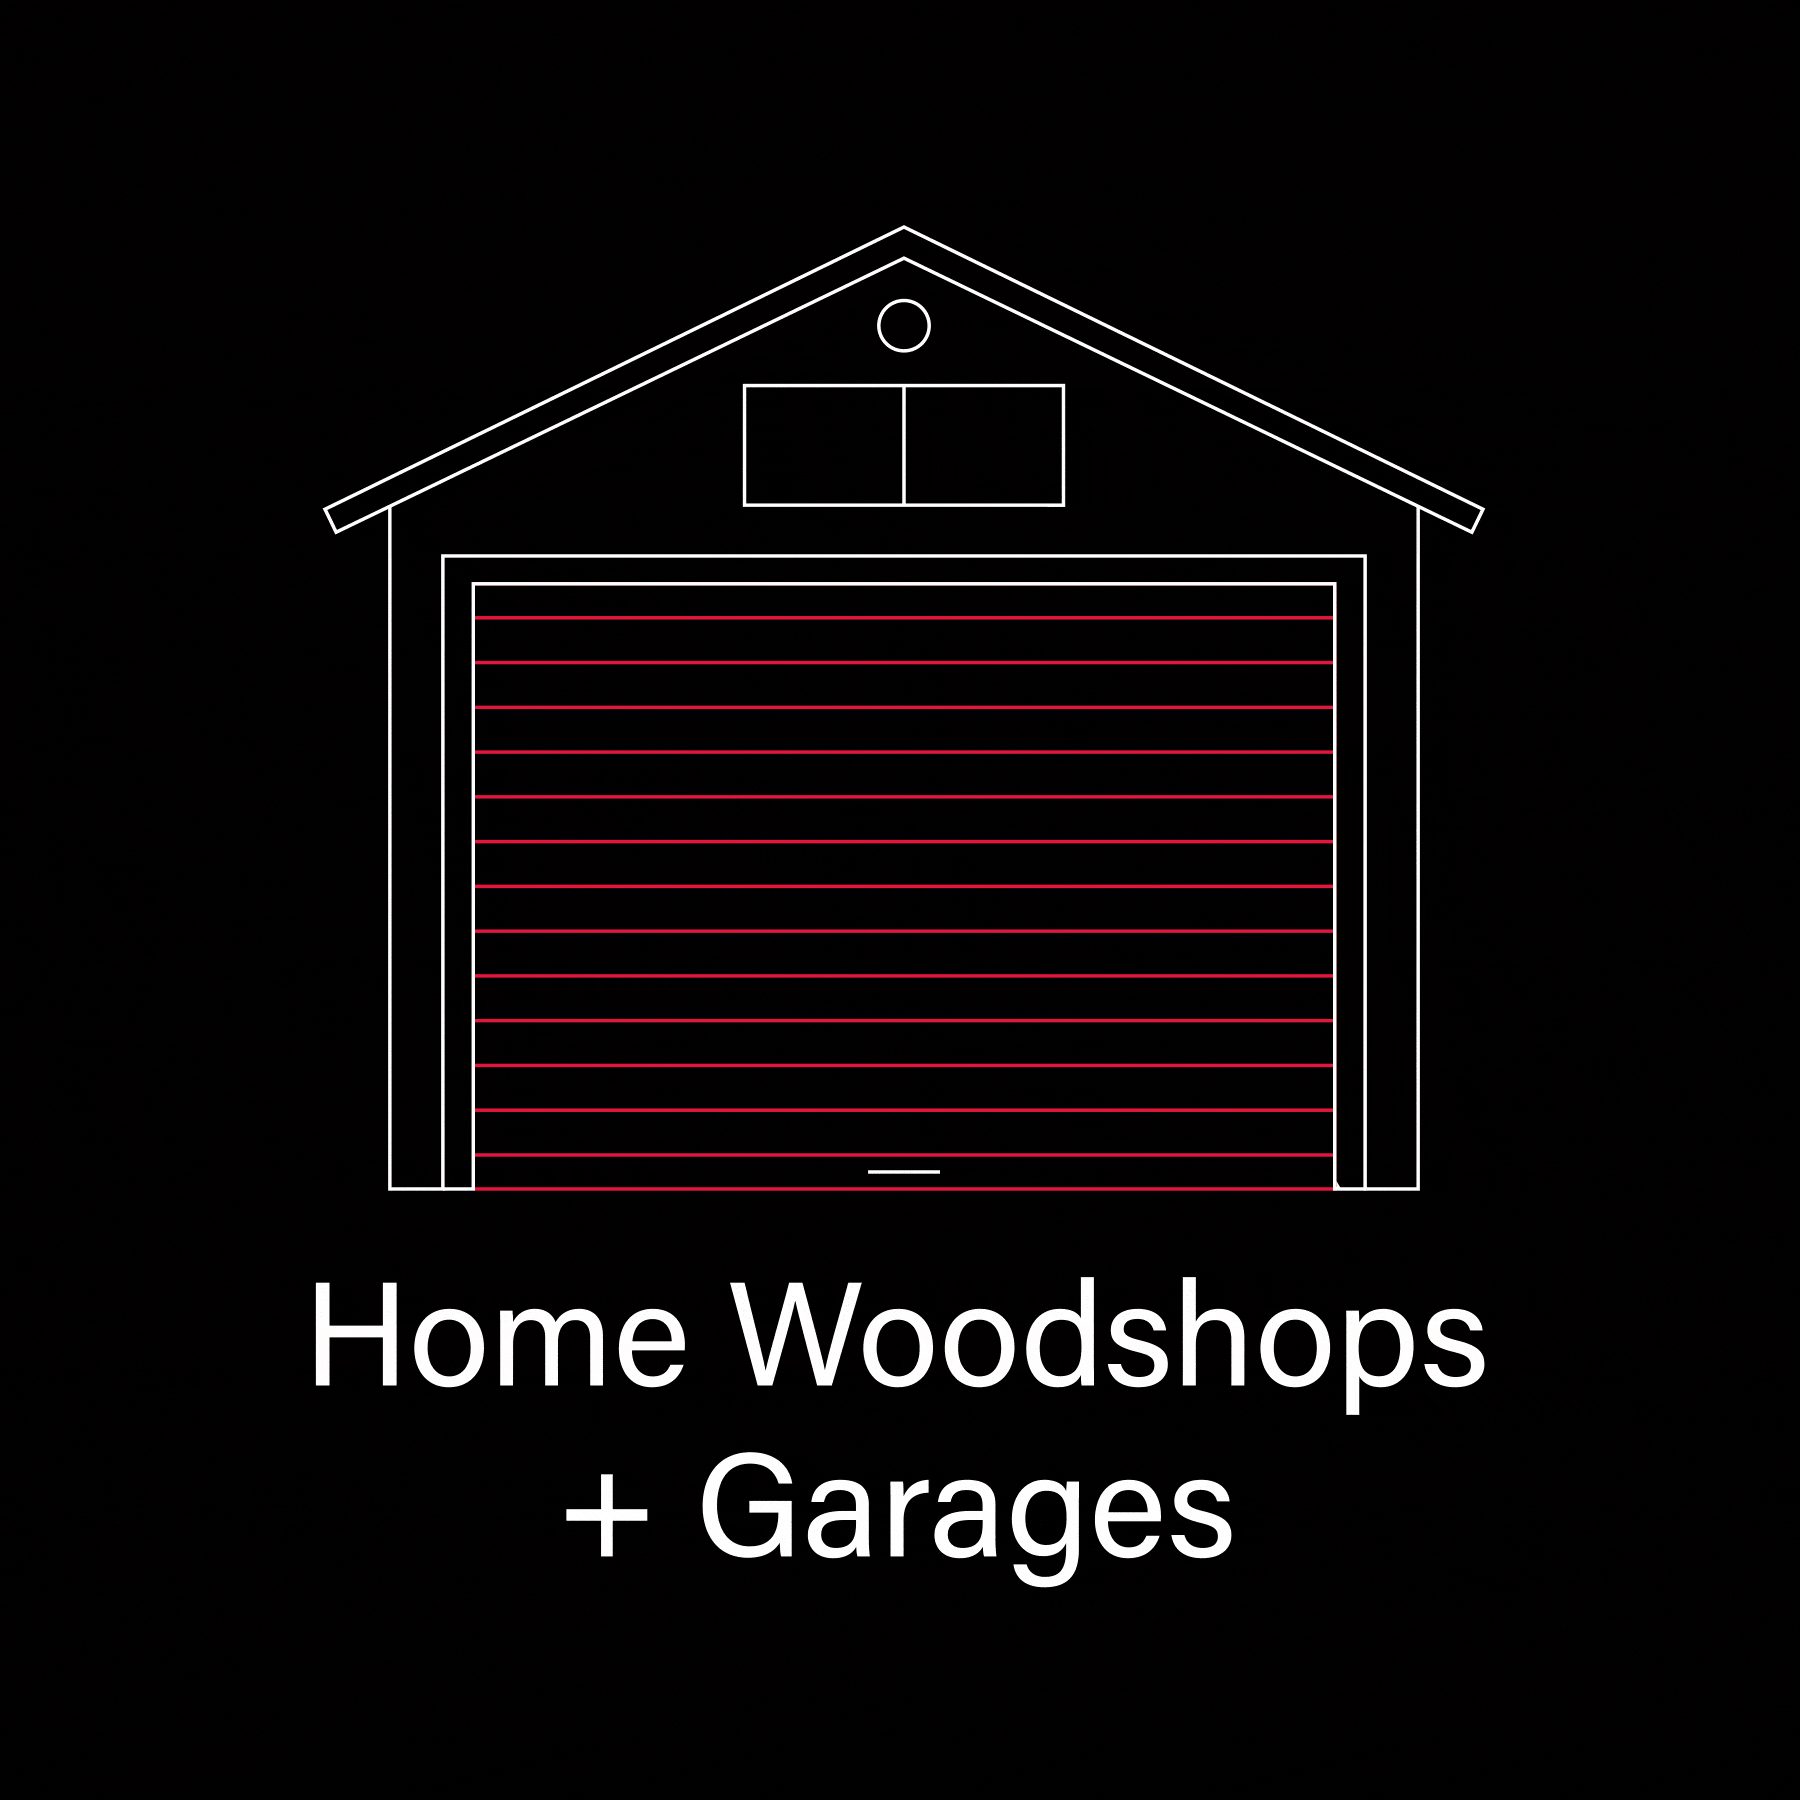 Home Woodshops and Garages